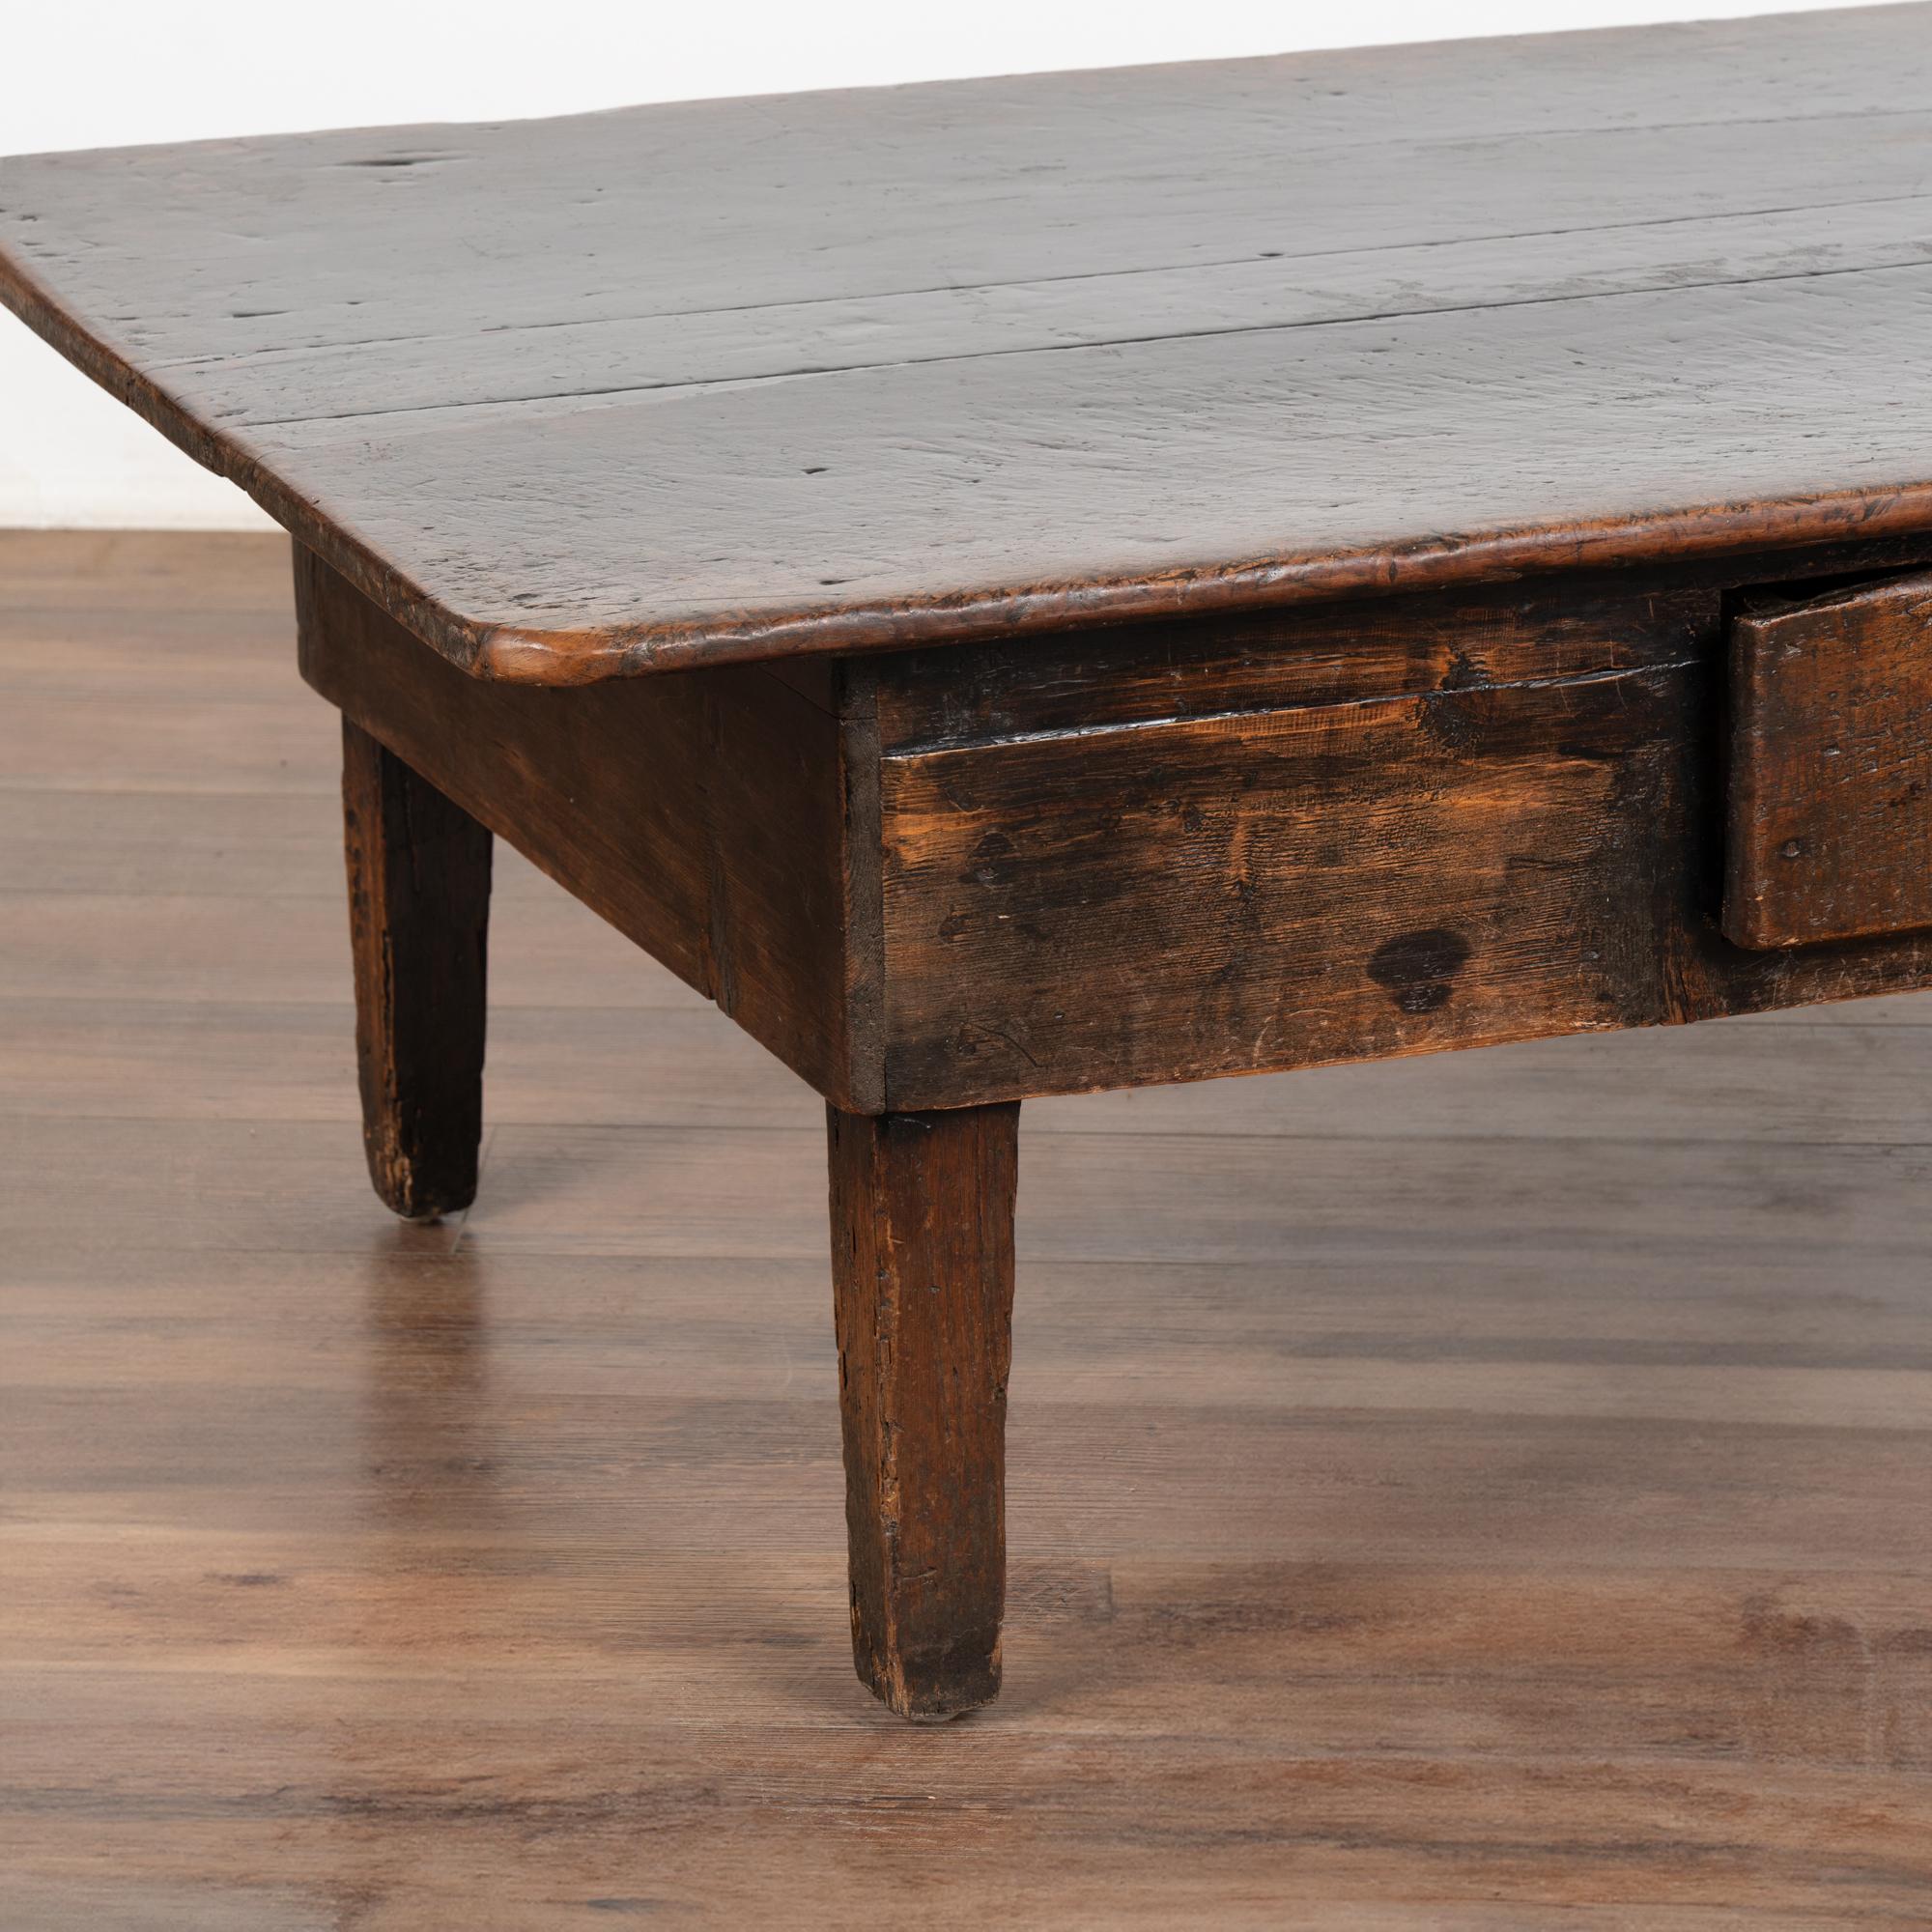 Chestnut French Country Coffee Table With Single Drawer, Circa 1800-40